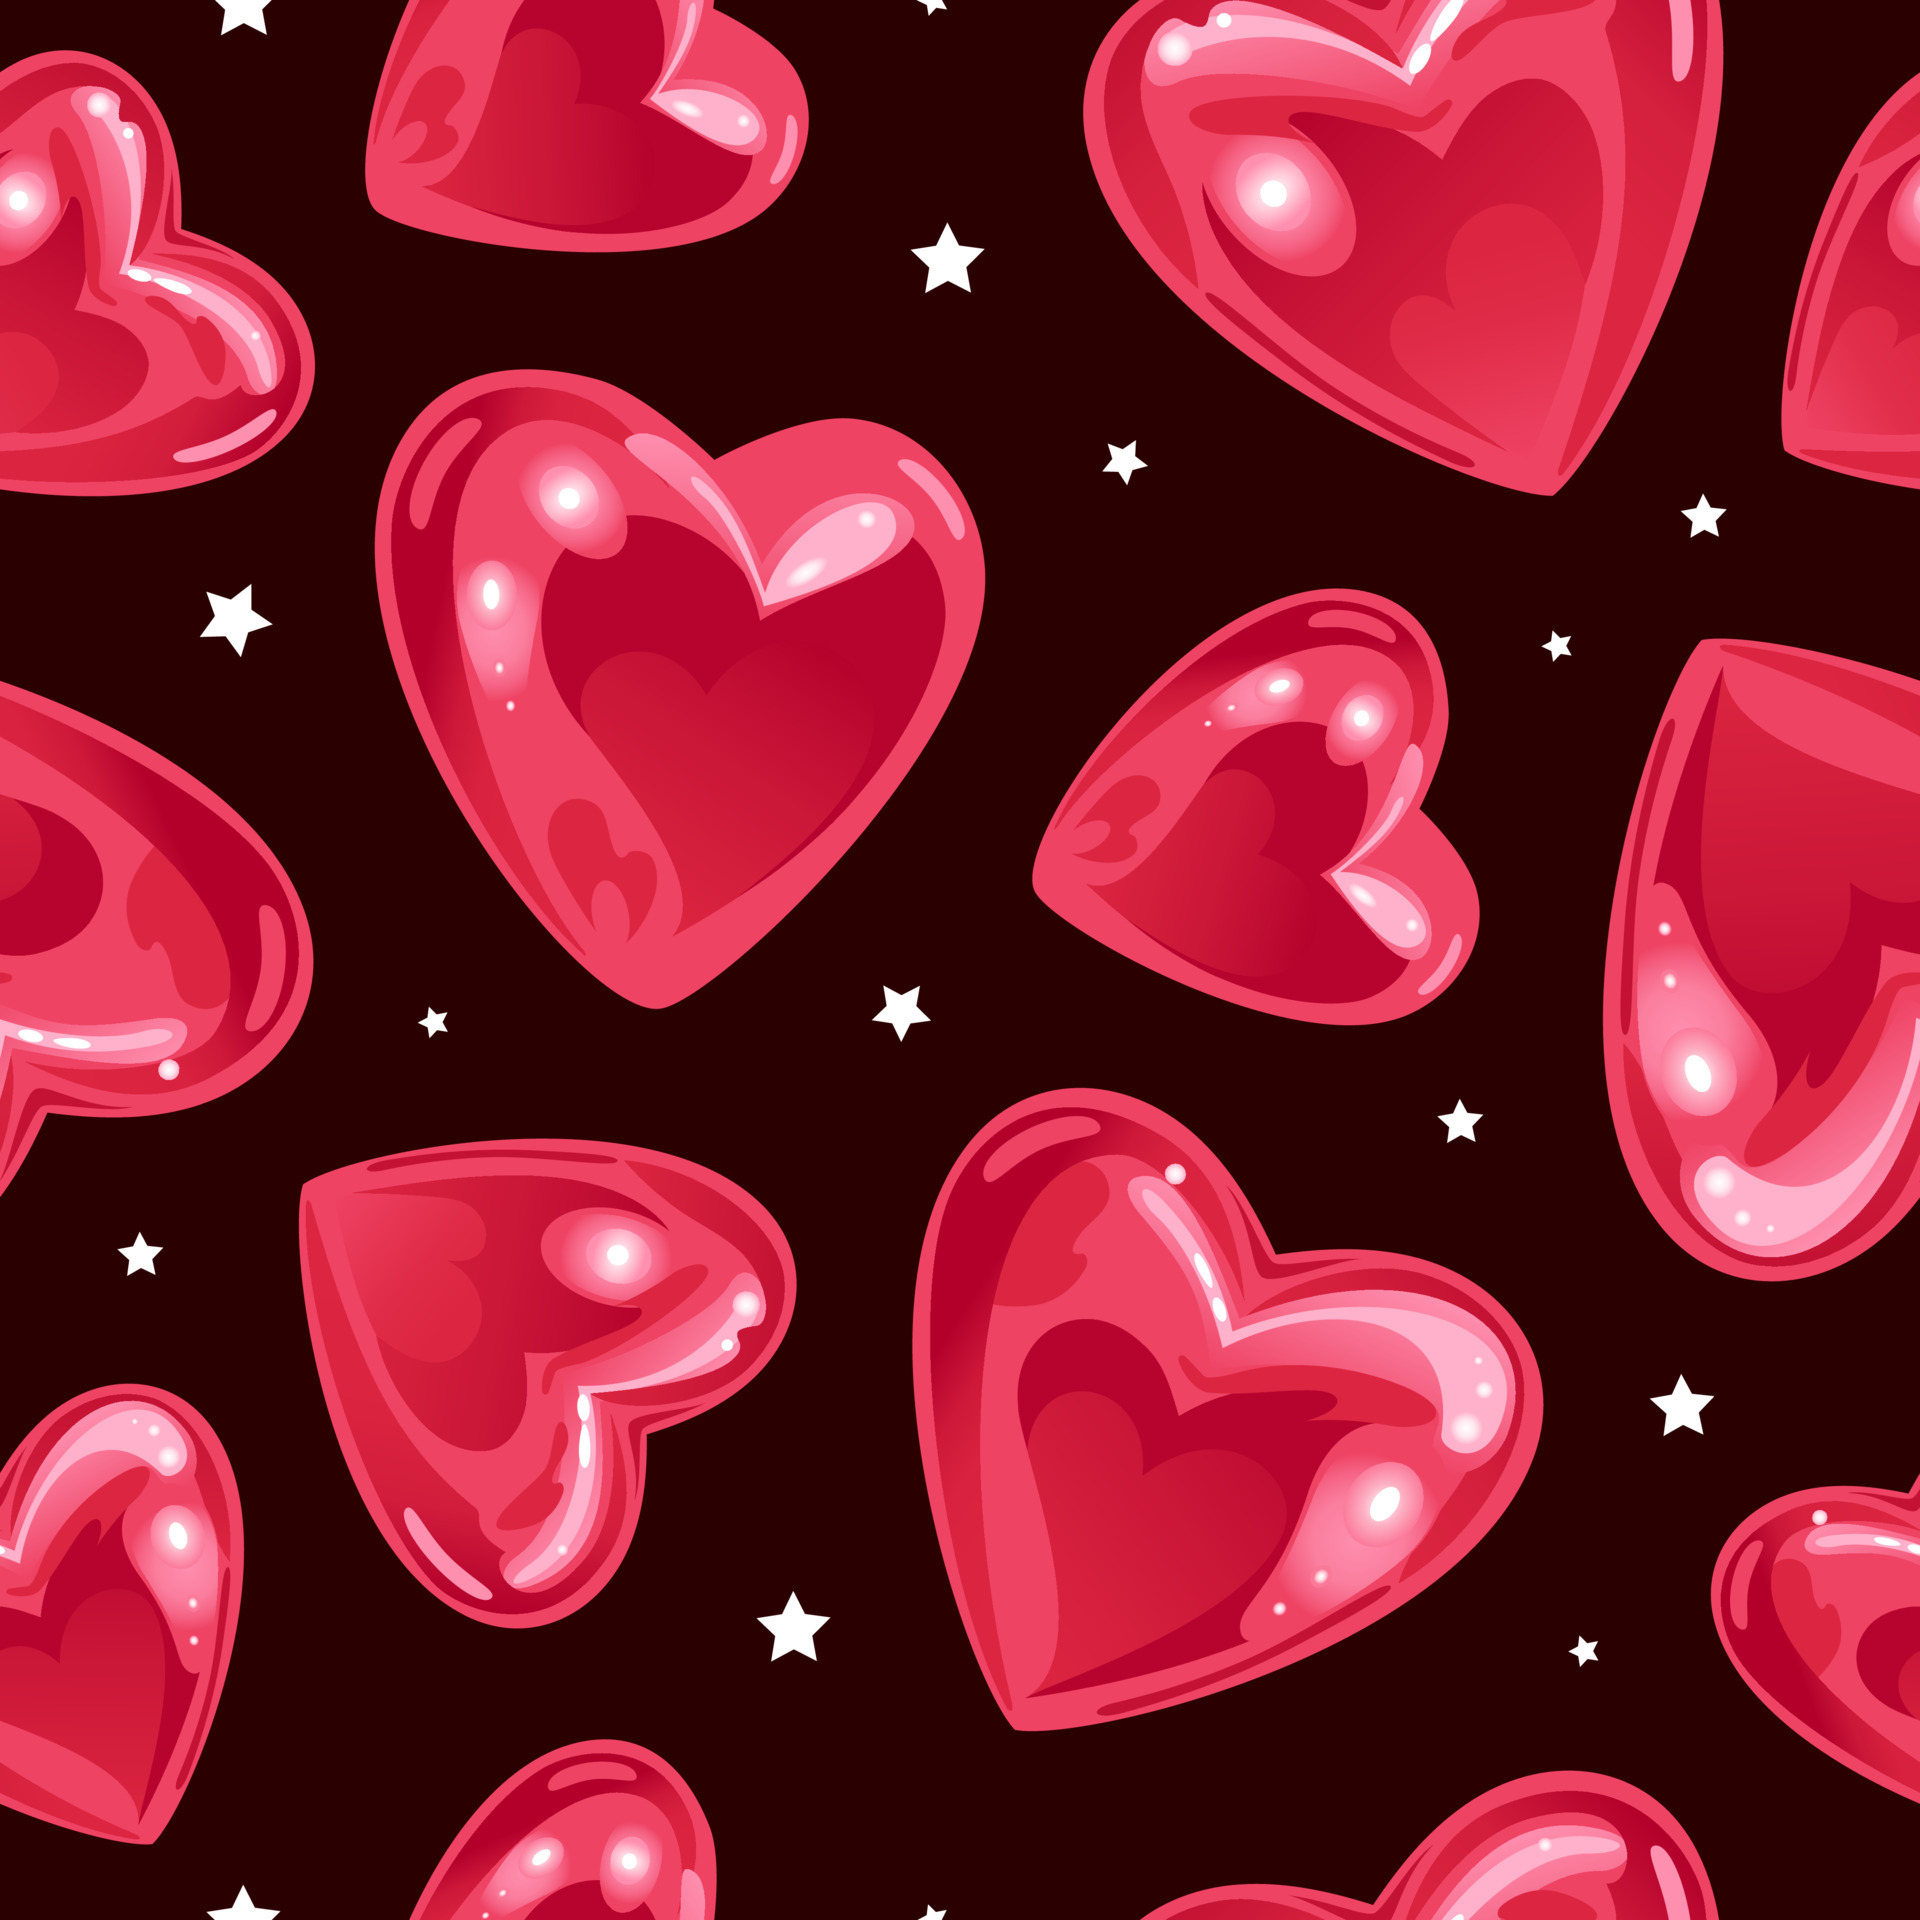 Valentines Day. Bright Seamless Pattern With Shiny Realistic Heart Shaped Balloons And Stars. On A Black Background. For Wallpaper, Printing On Fabrics, Packaging